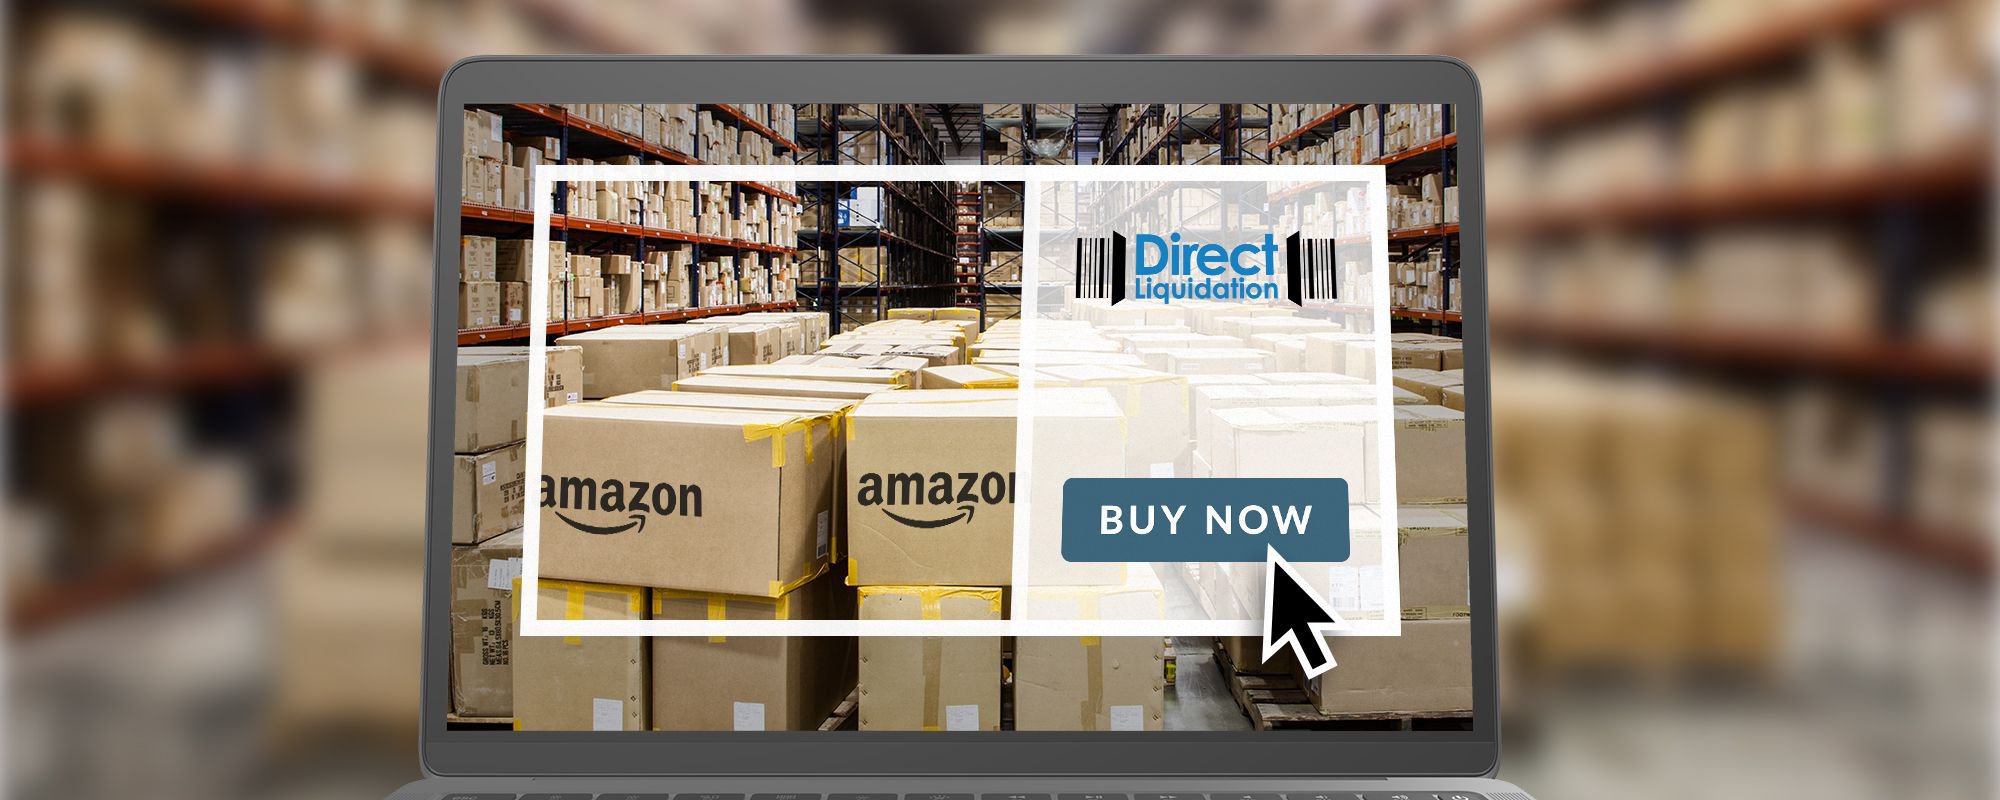 how to buy amazon returns pallets online featured2